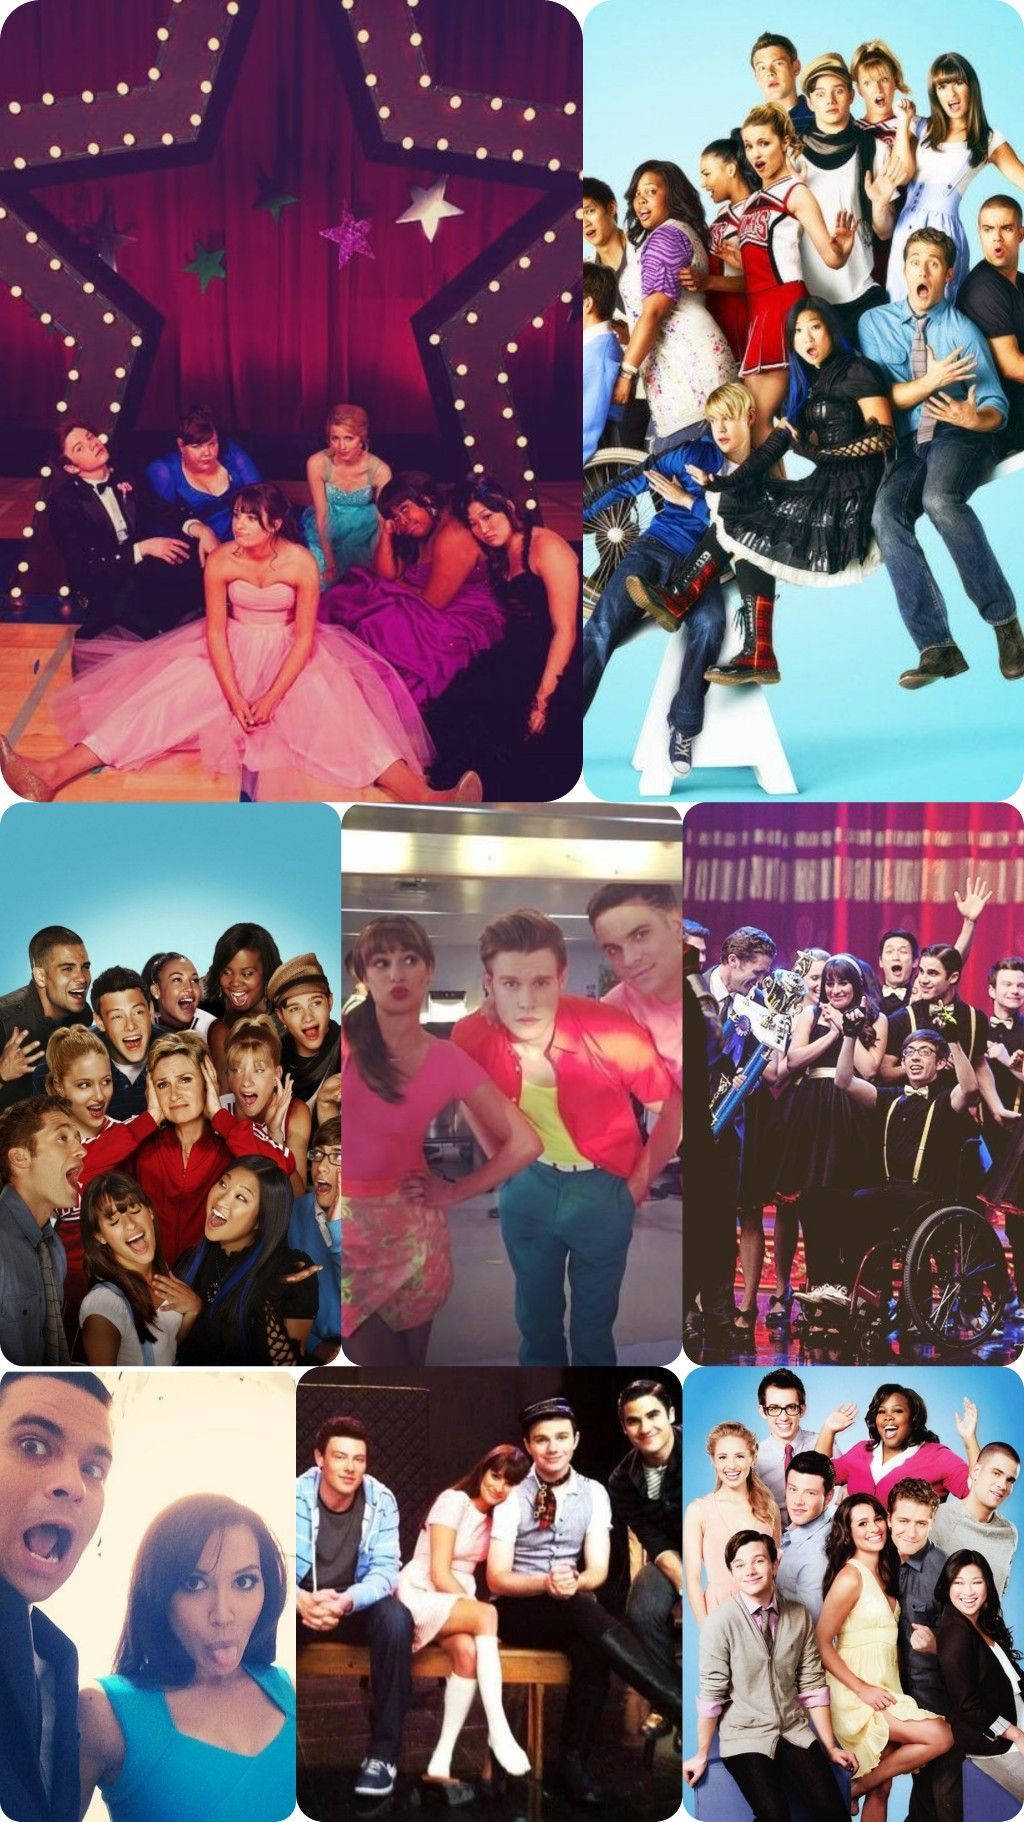 Glee Cast Members Photo Collage Wallpaper